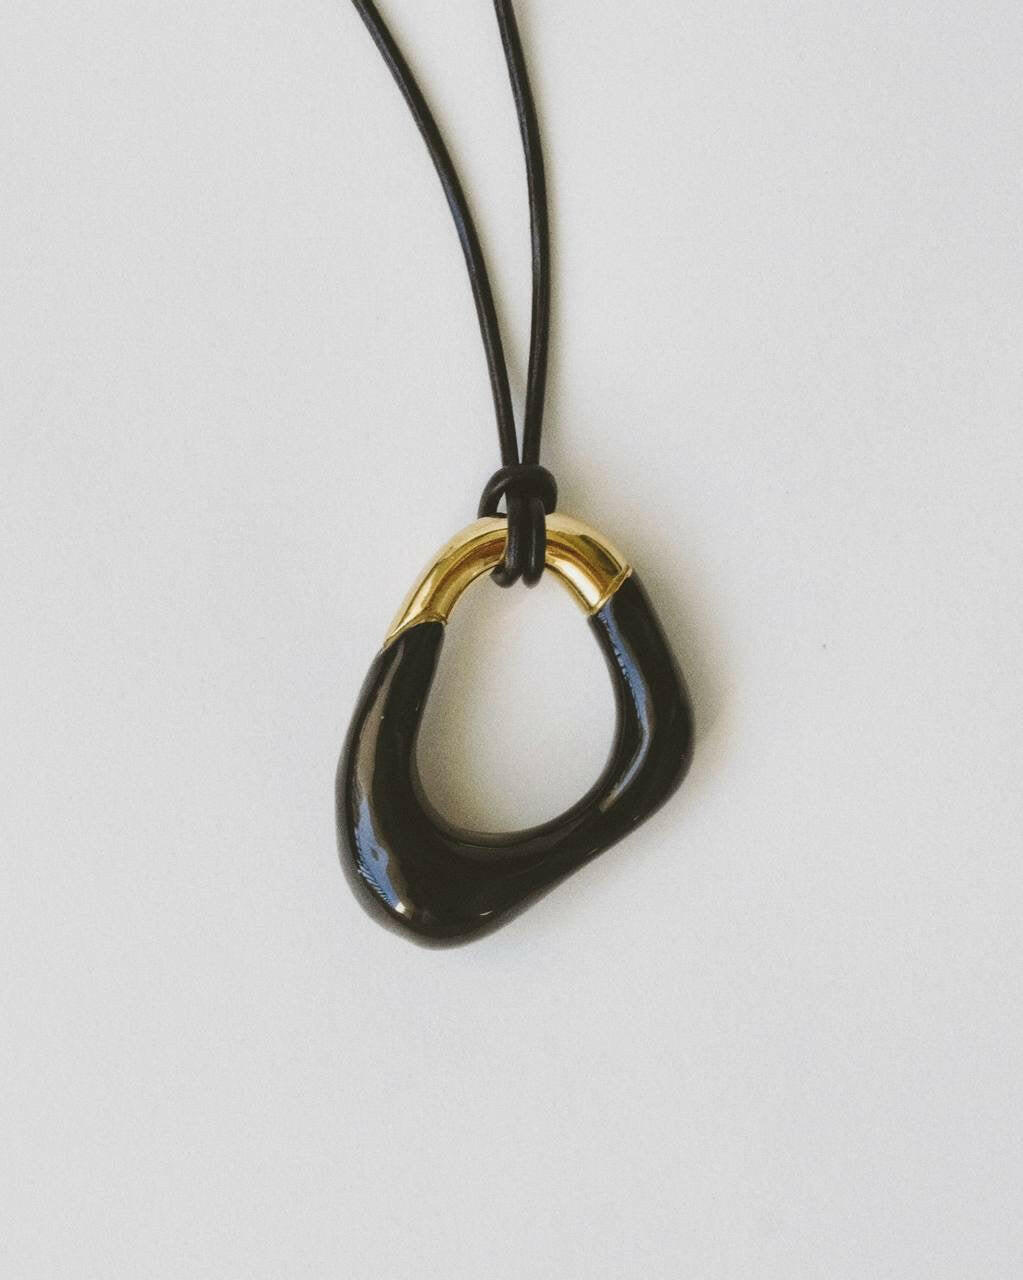 Momentum Necklace in black and gold, designed by Ani Han, laid flat. The pendant's unique shape symbolizes the fluidity of life, with enamel coating and 18K gold plating.